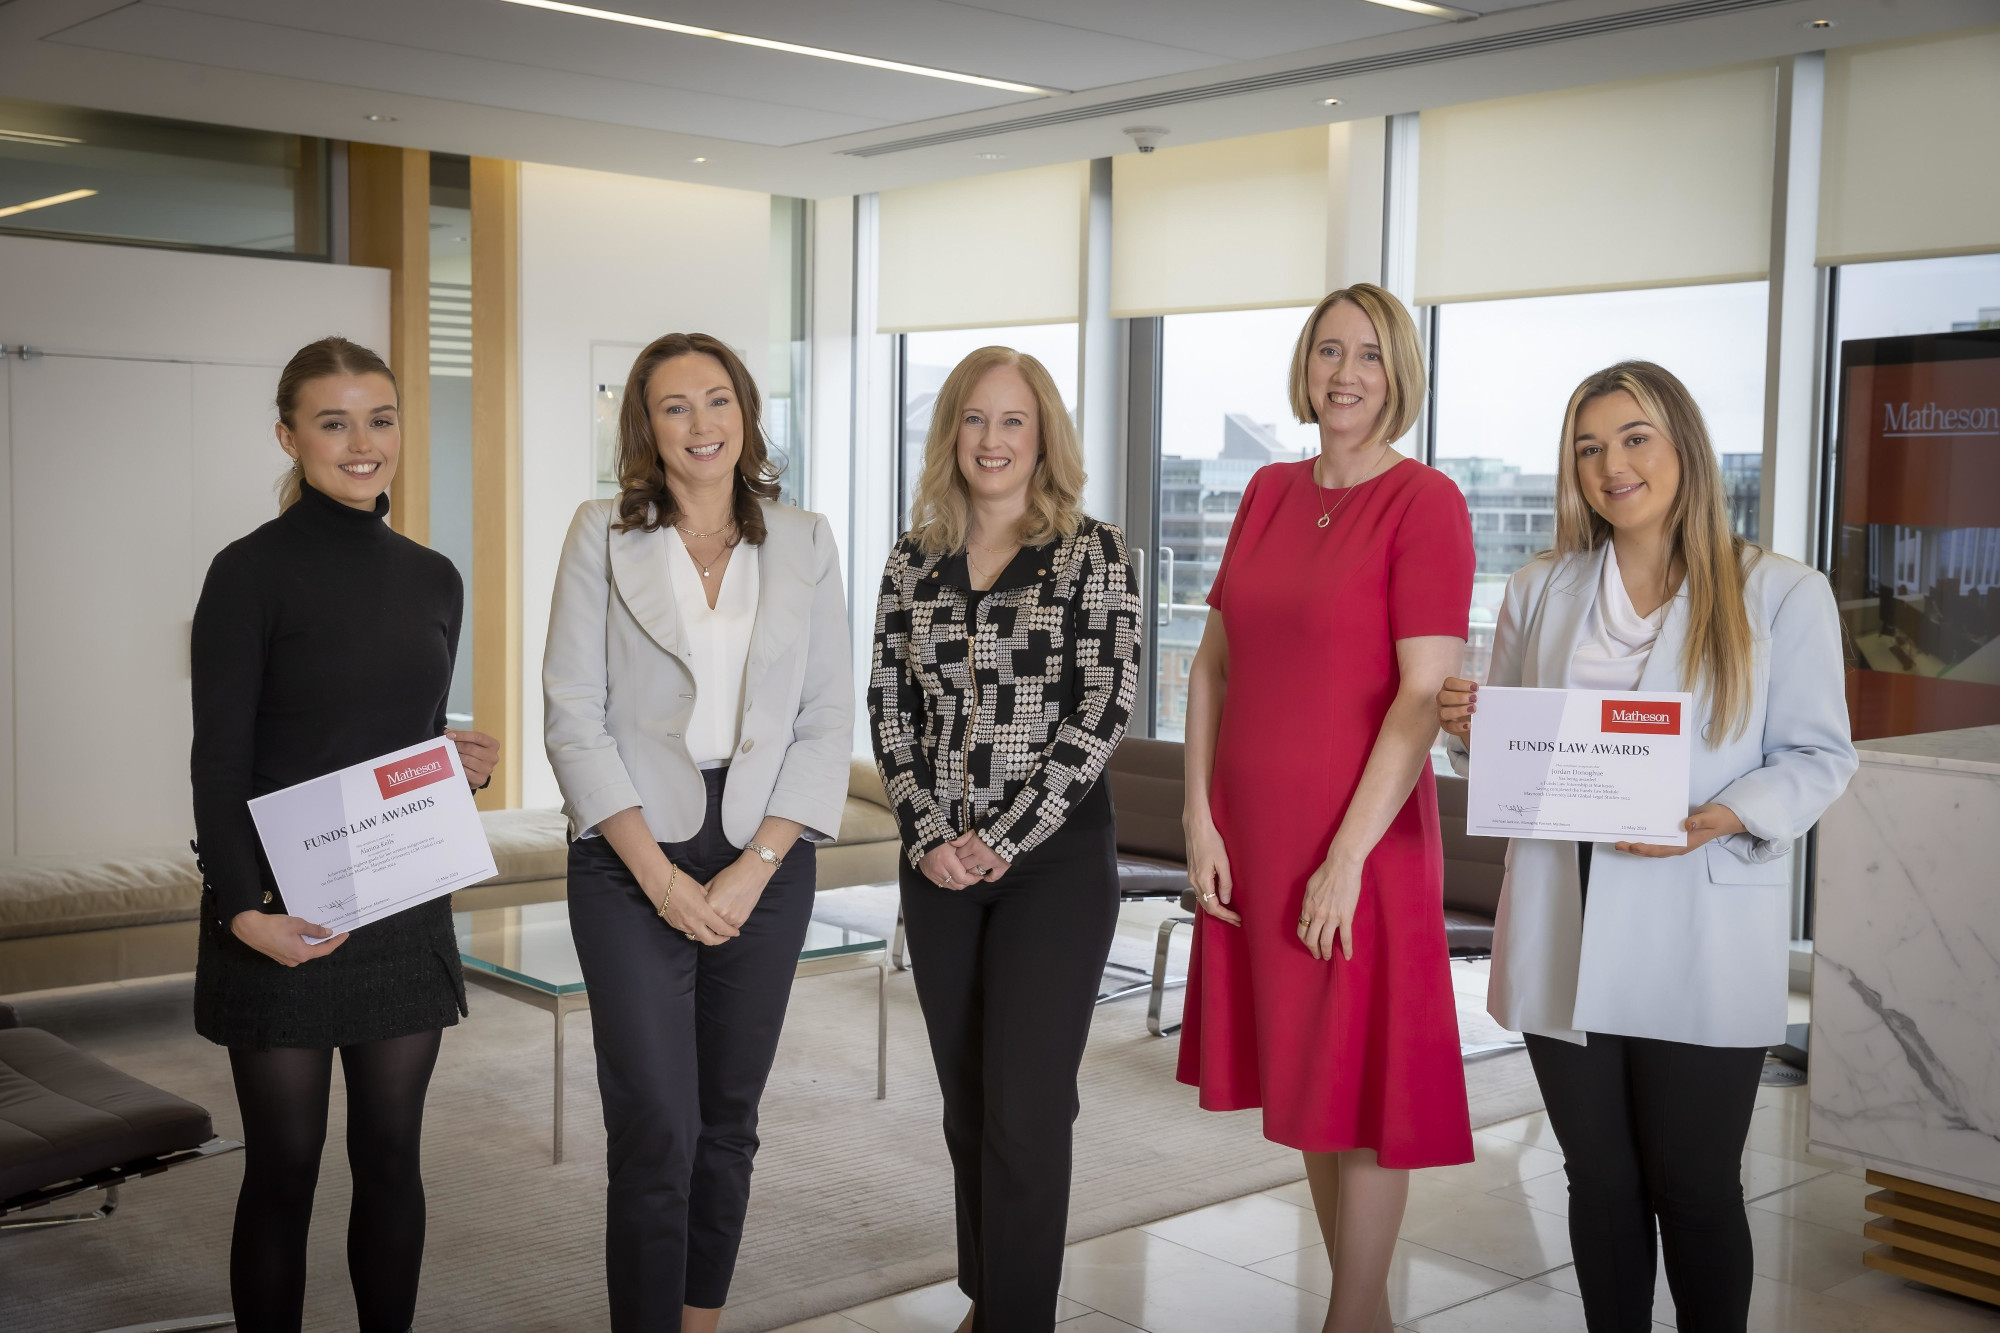 Matheson presents internship and legal writing awards to Maynooth law students